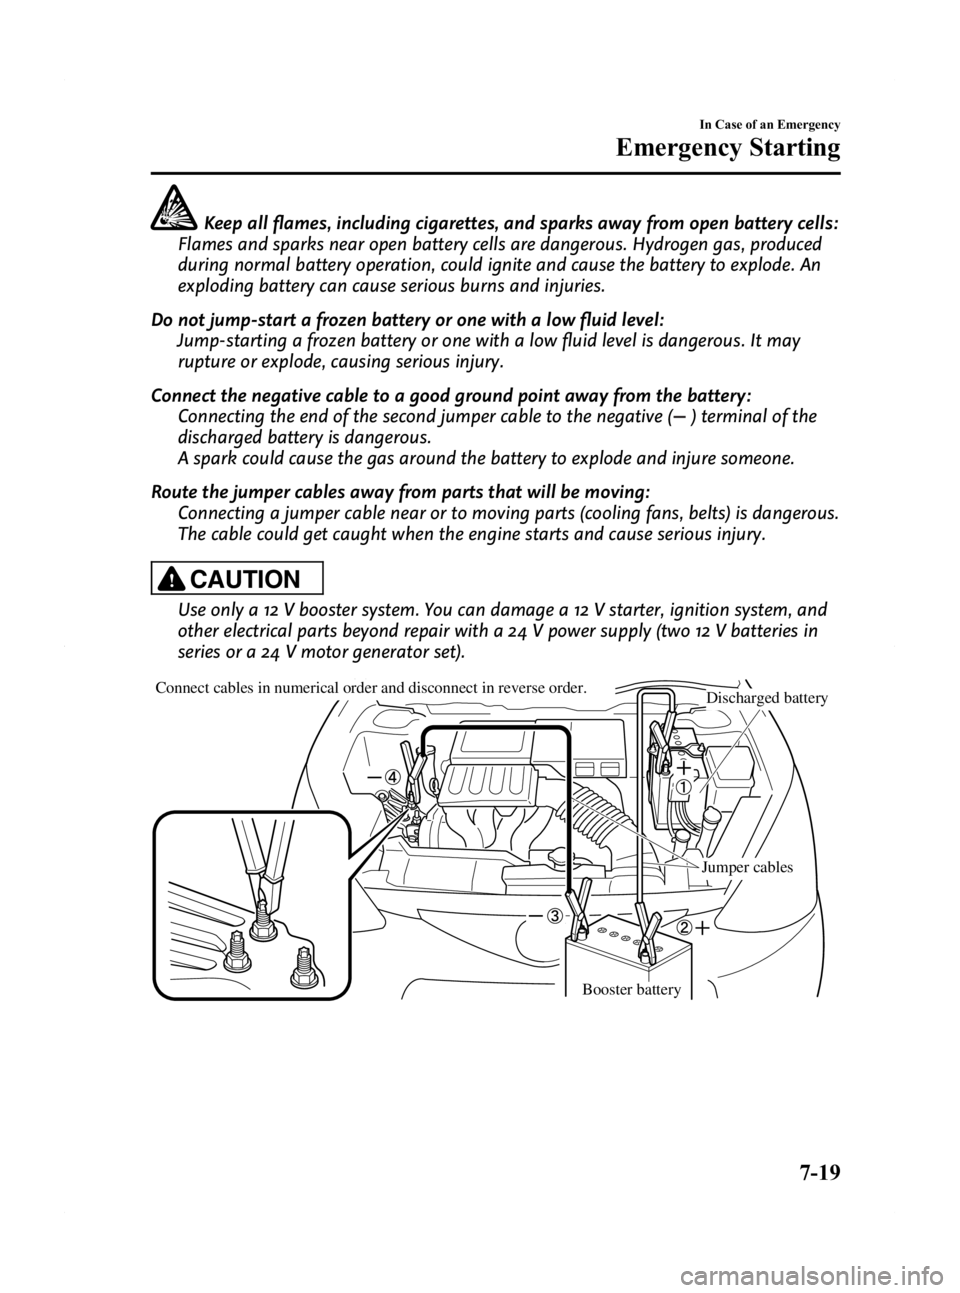 MAZDA MODEL 2 2011  Owners Manual Black plate (227,1)
Keep all flames, including cigarettes, and sparks away from open battery cells:
Flames and sparks near open battery cells are dangerous. Hydrogen gas, produced
during normal batter